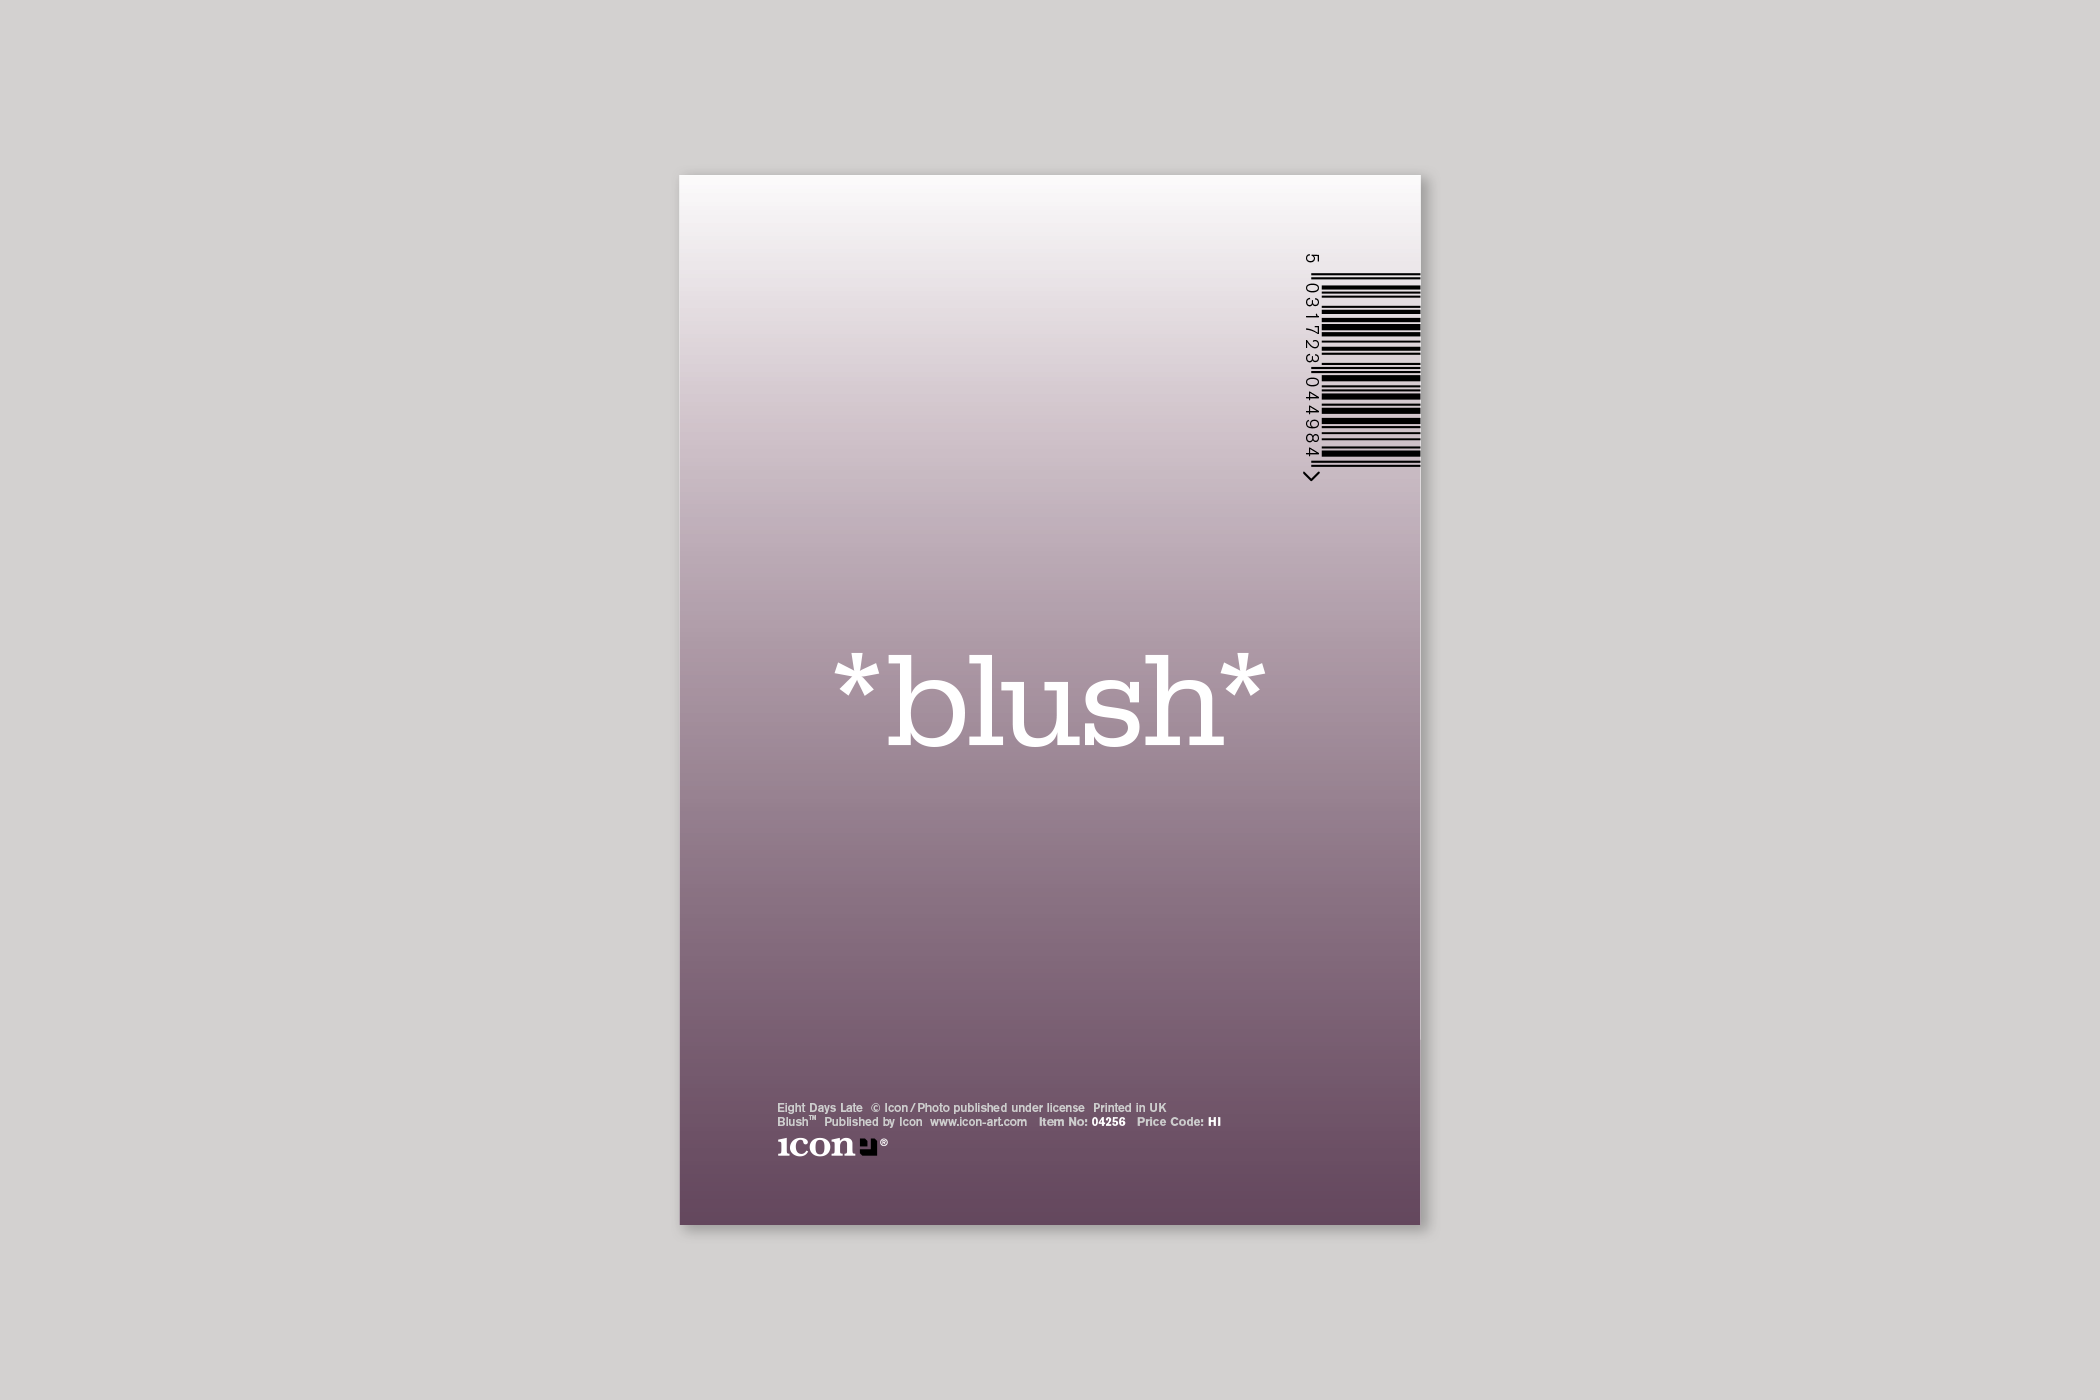 Eight Days Late from Blush humour range of greeting cards by Icon, with envelope.